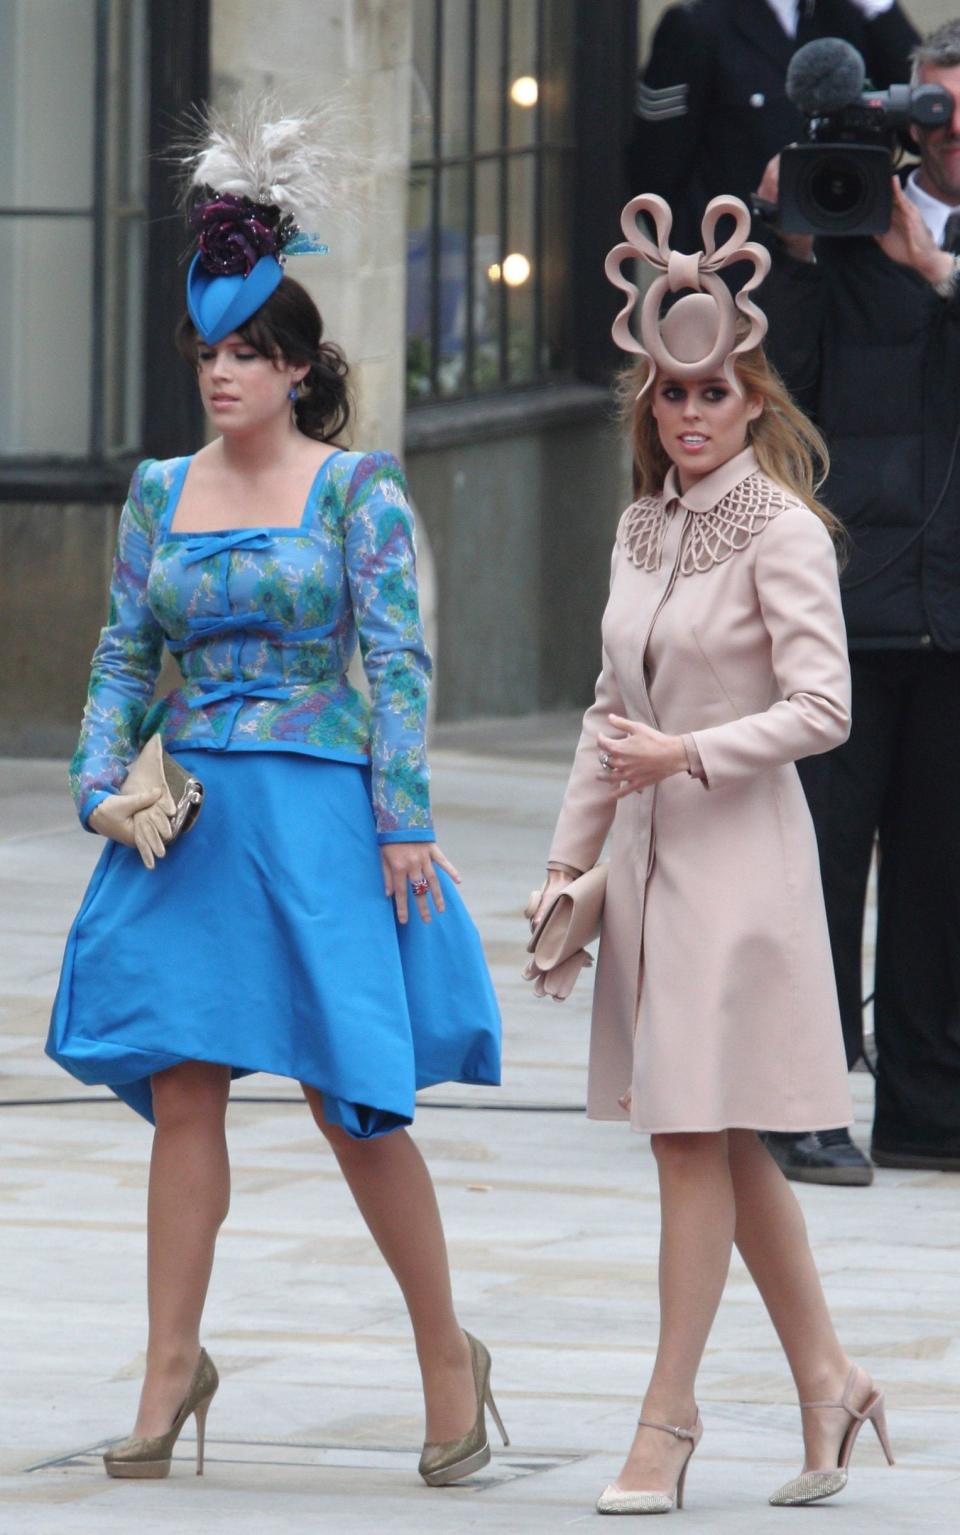 Princesses Beatrice and Eugenie of York attend the royal wedding of Prince William and Catherine Middleton in 2011.  - Wireimage